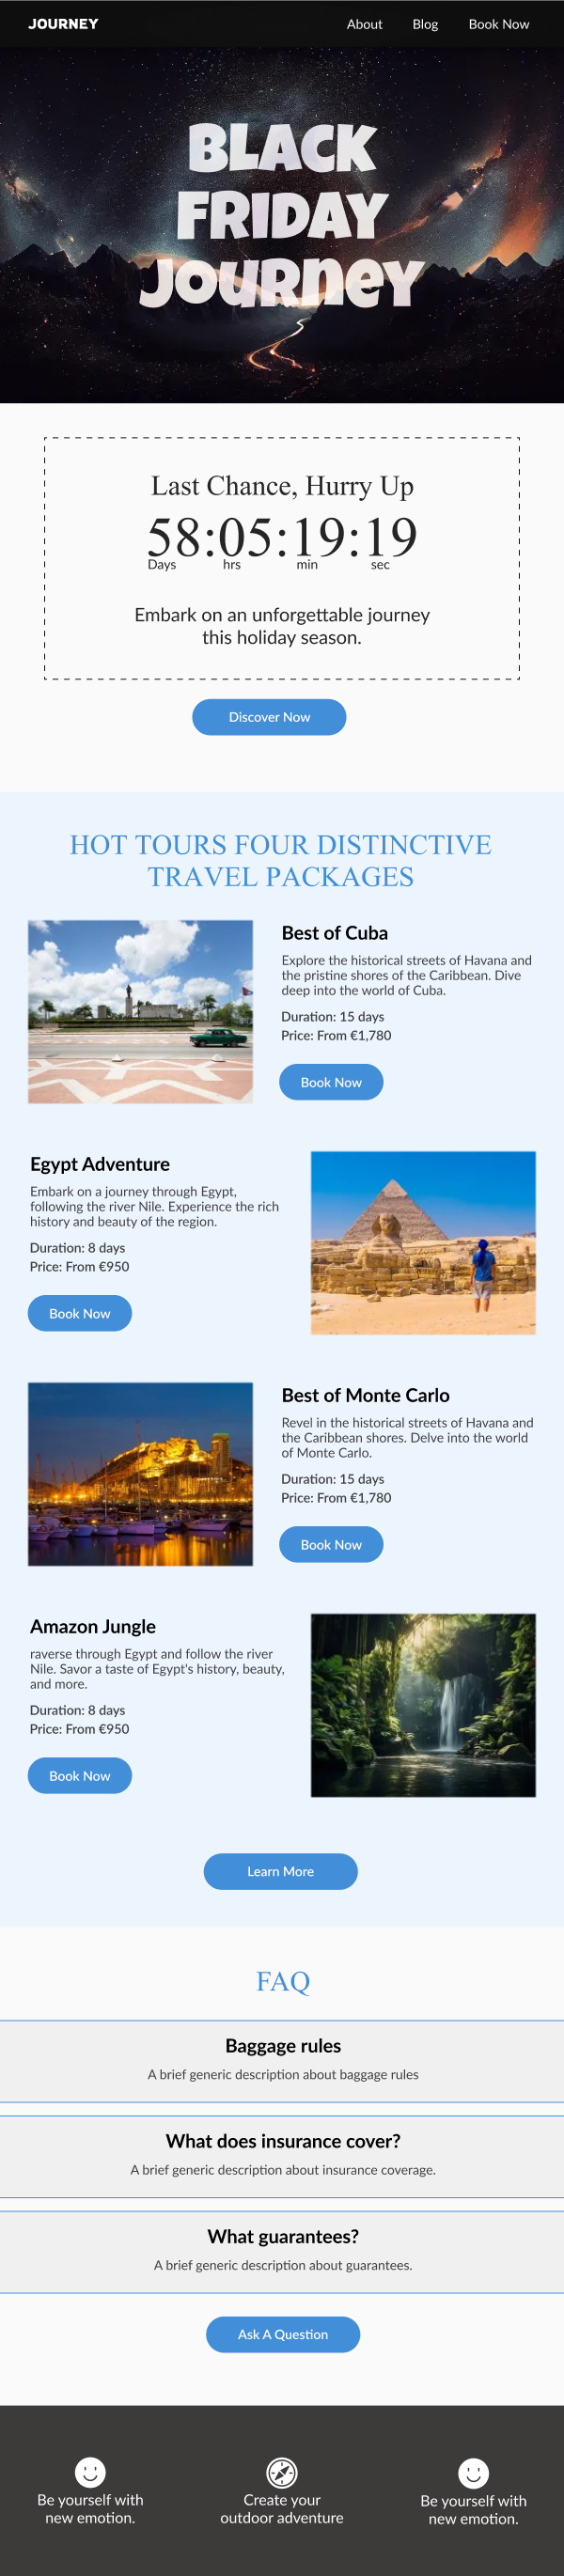 Travel-Hot Tour Packages